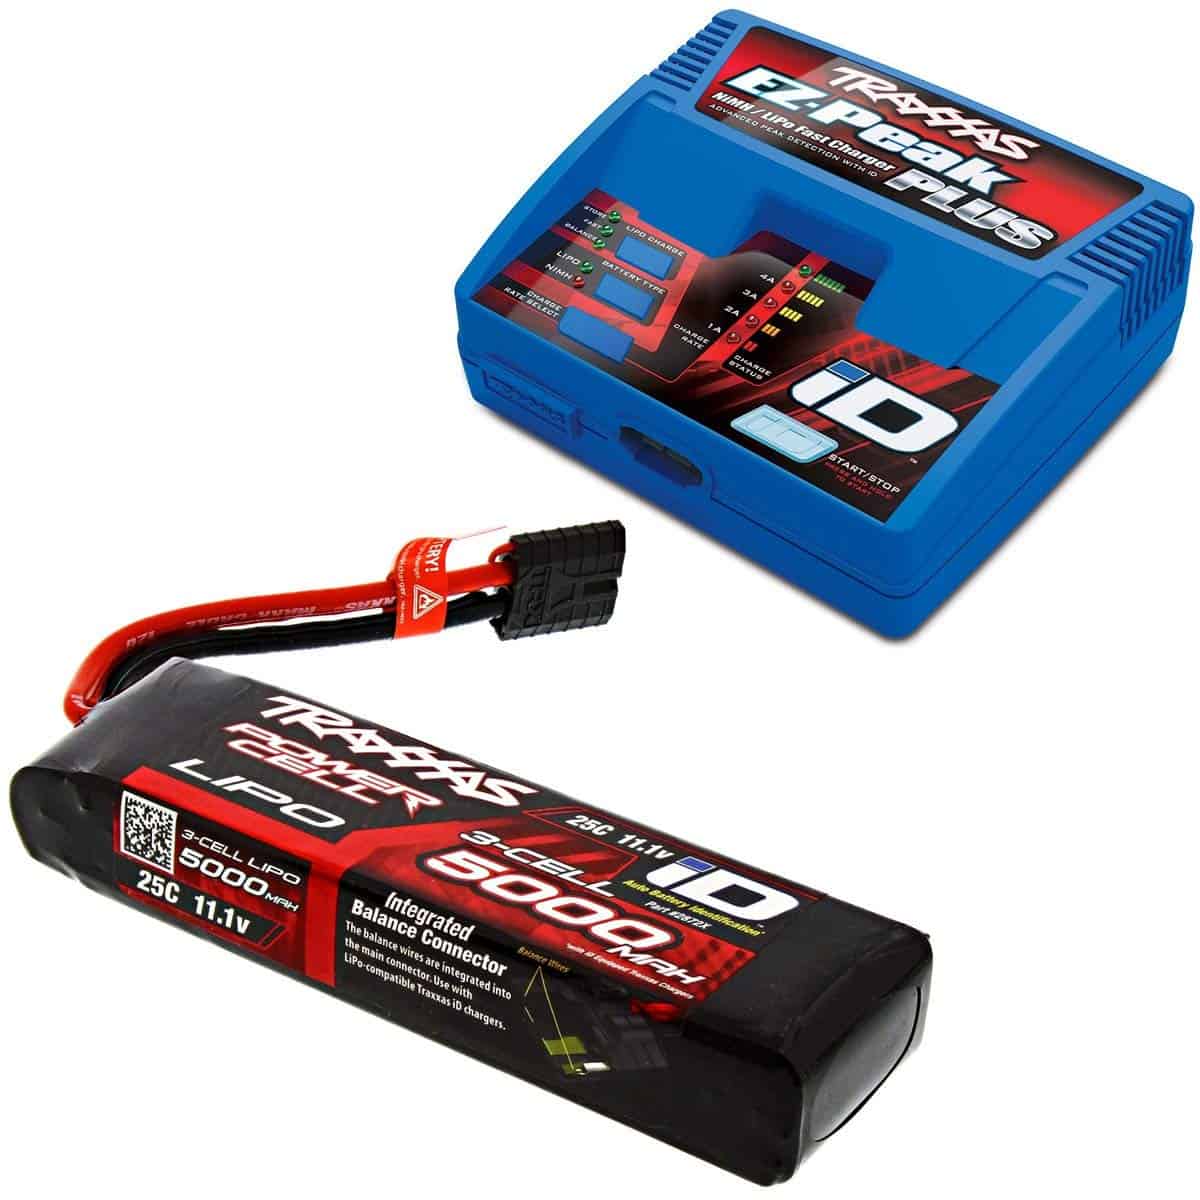 What to Do When You Notice Your Traxxas Battery Not Charging